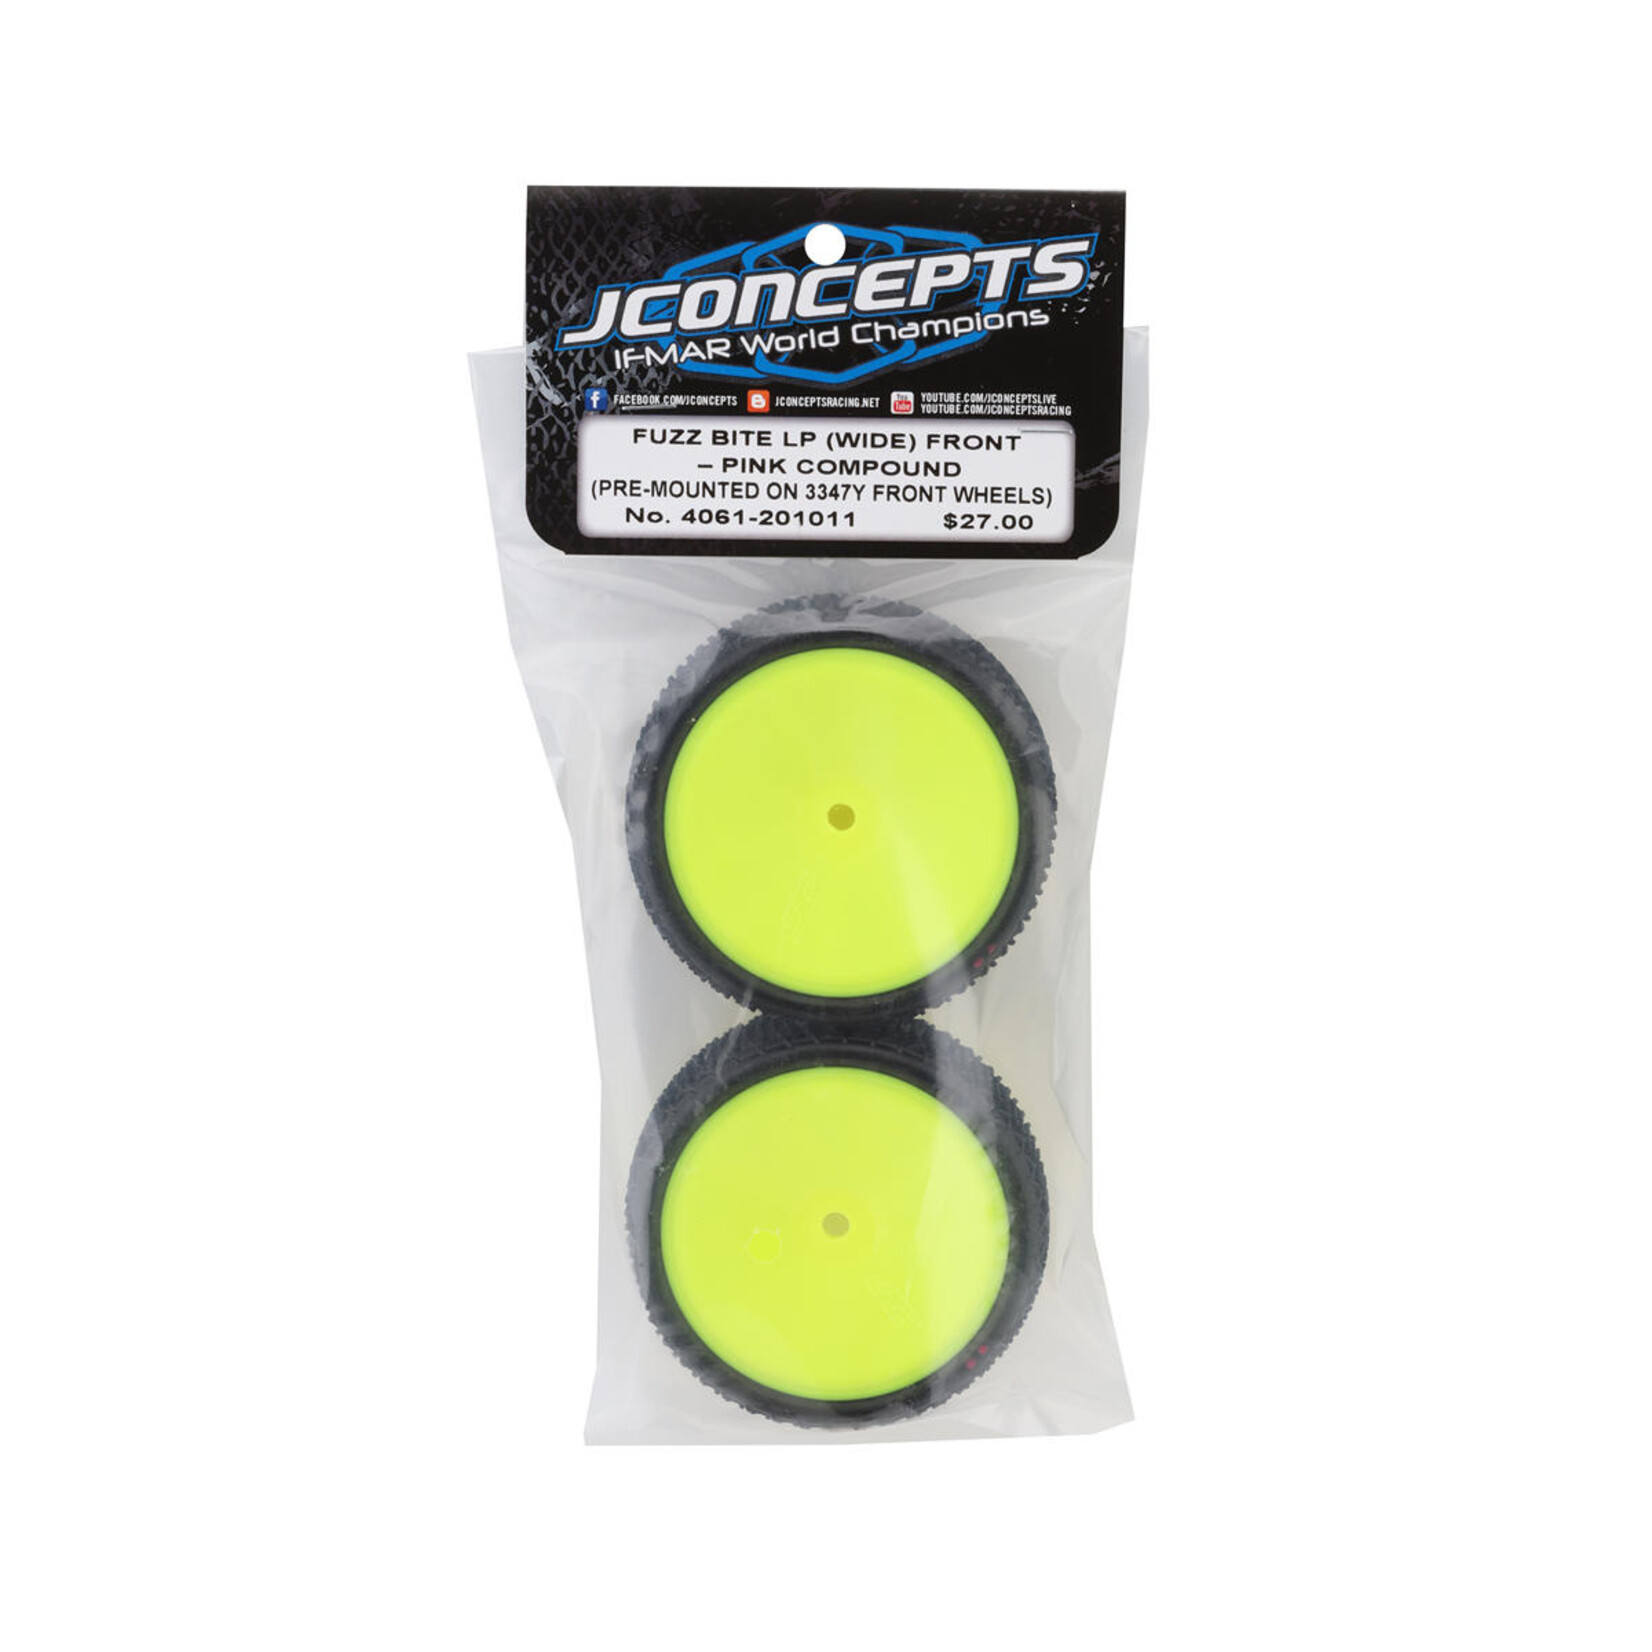 JConcepts JConcepts Fuzz Bite LP 2.2" (Wide) Pre-Mounted 2WD Front Buggy Tire (Yellow) (2) (Pink) w/12mm Hex #4061-201011